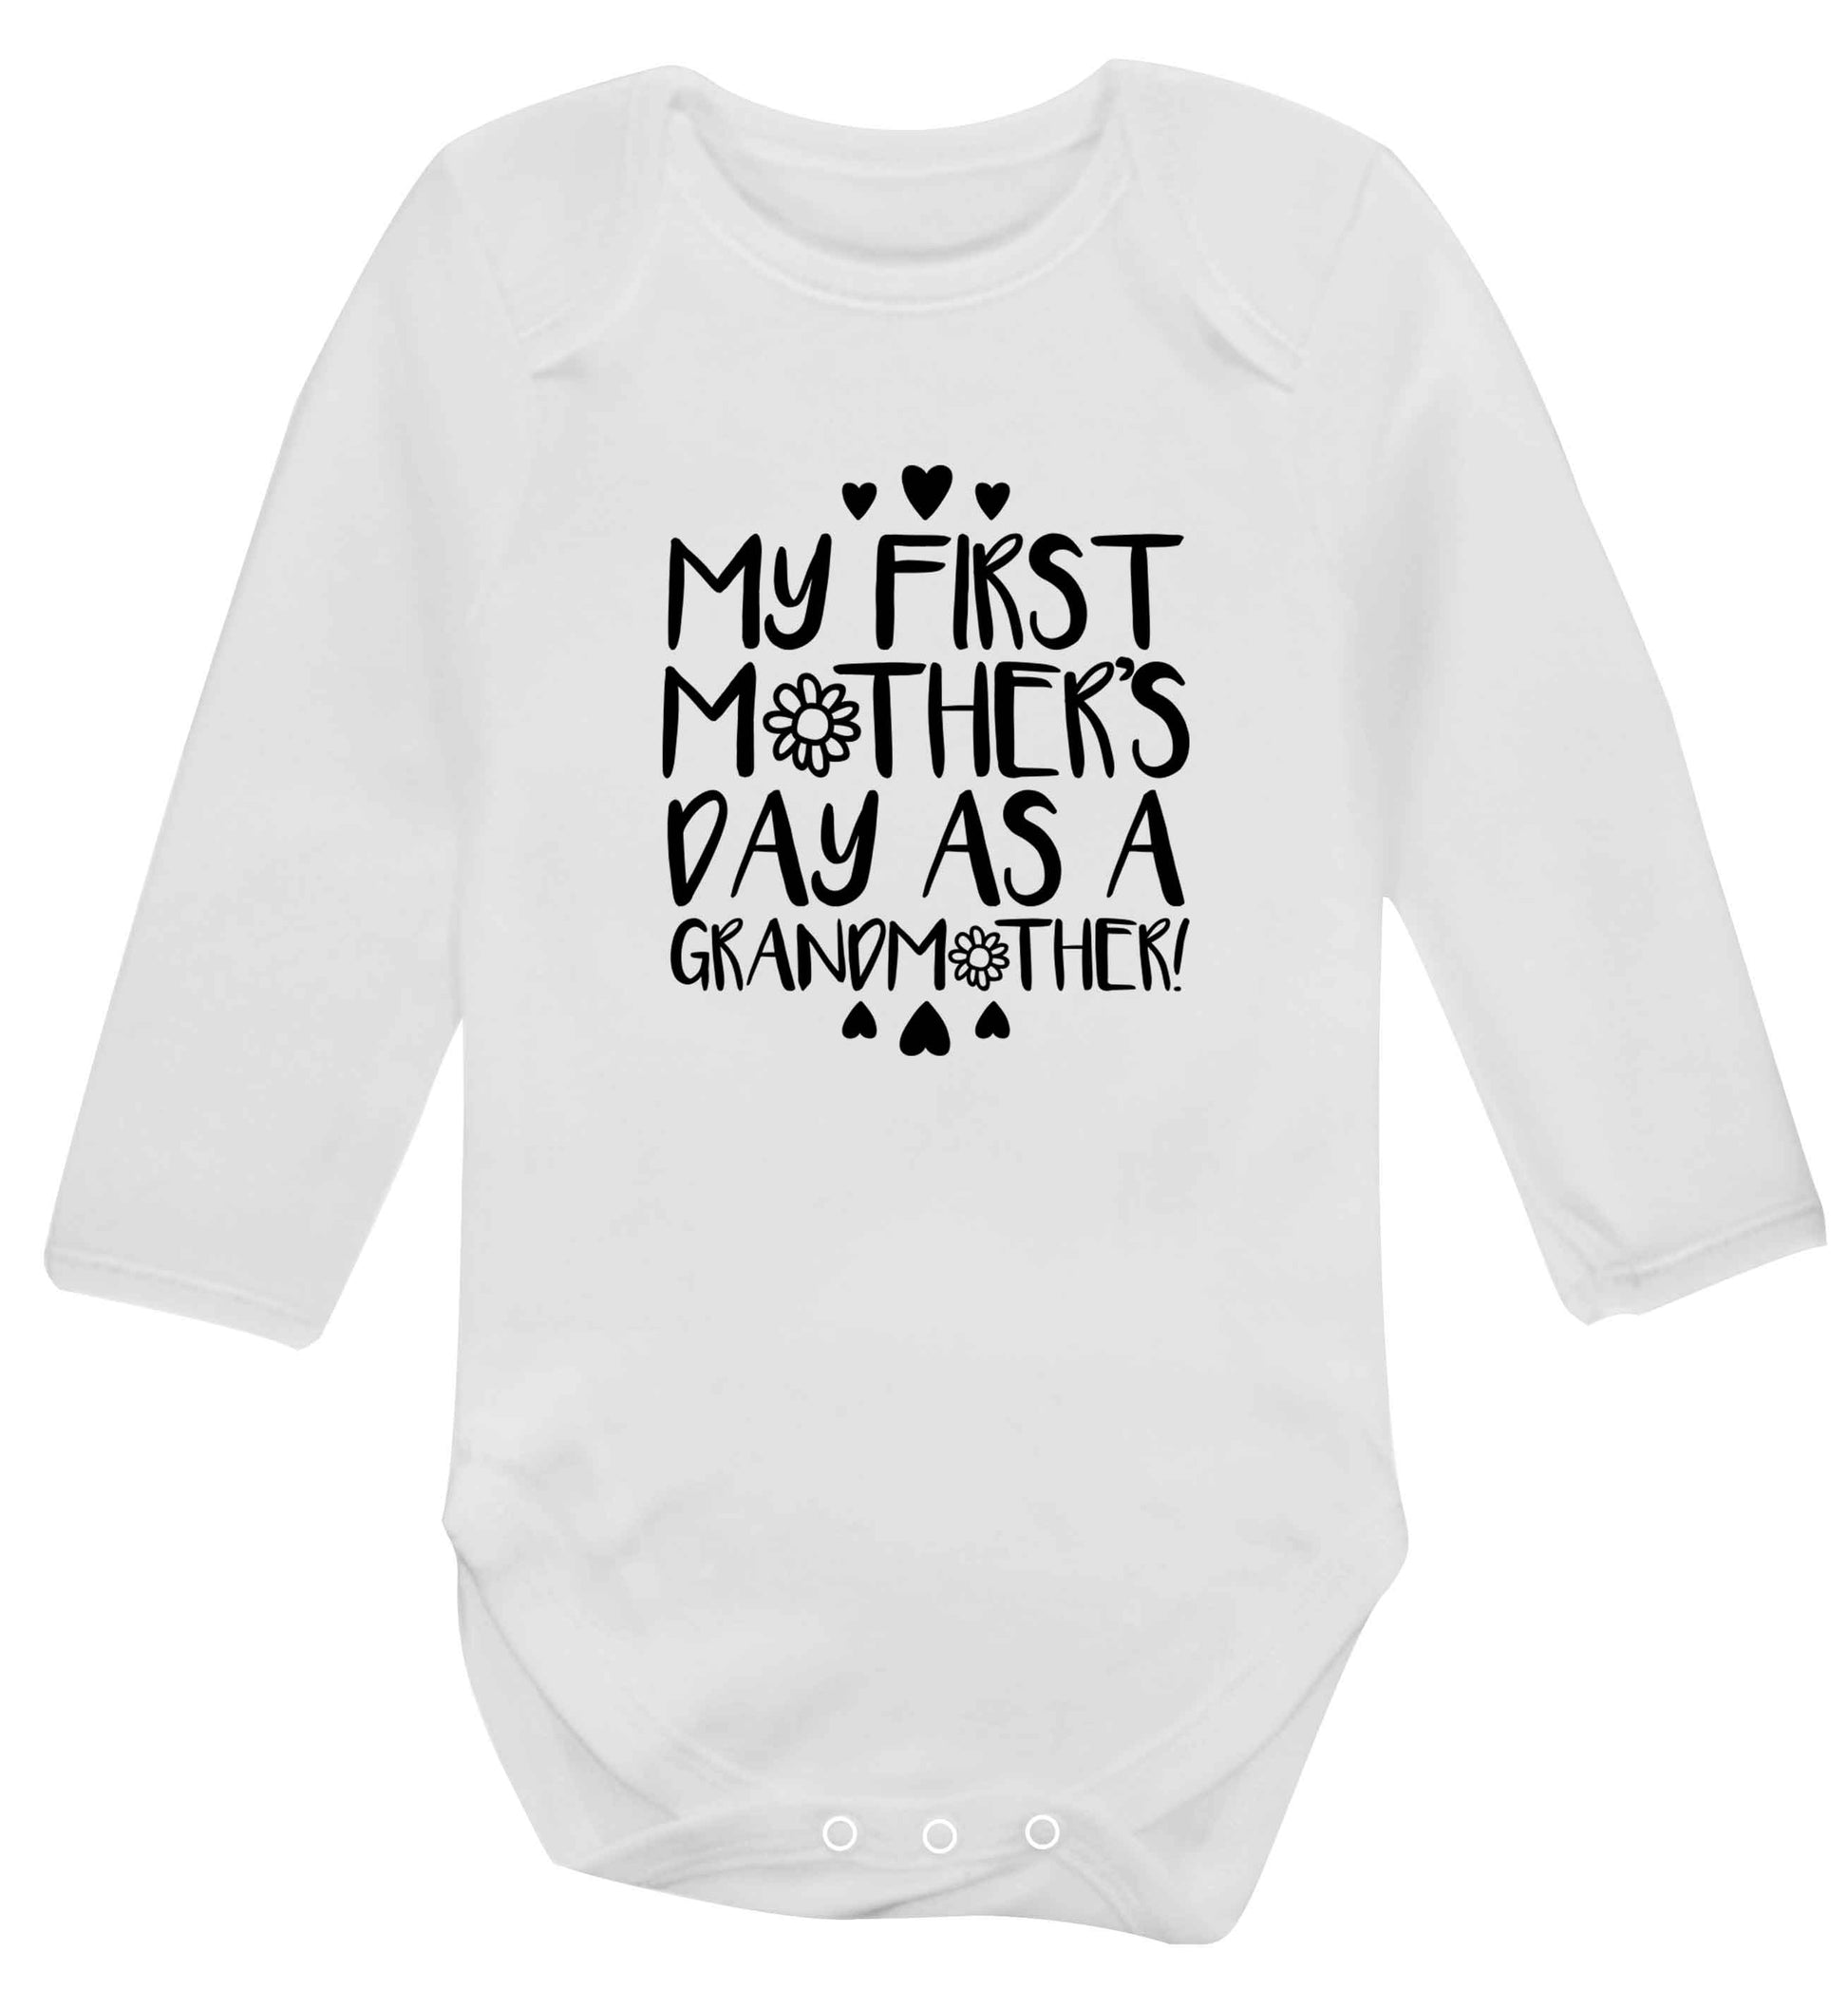 It's my first mother's day as a grandmother baby vest long sleeved white 6-12 months